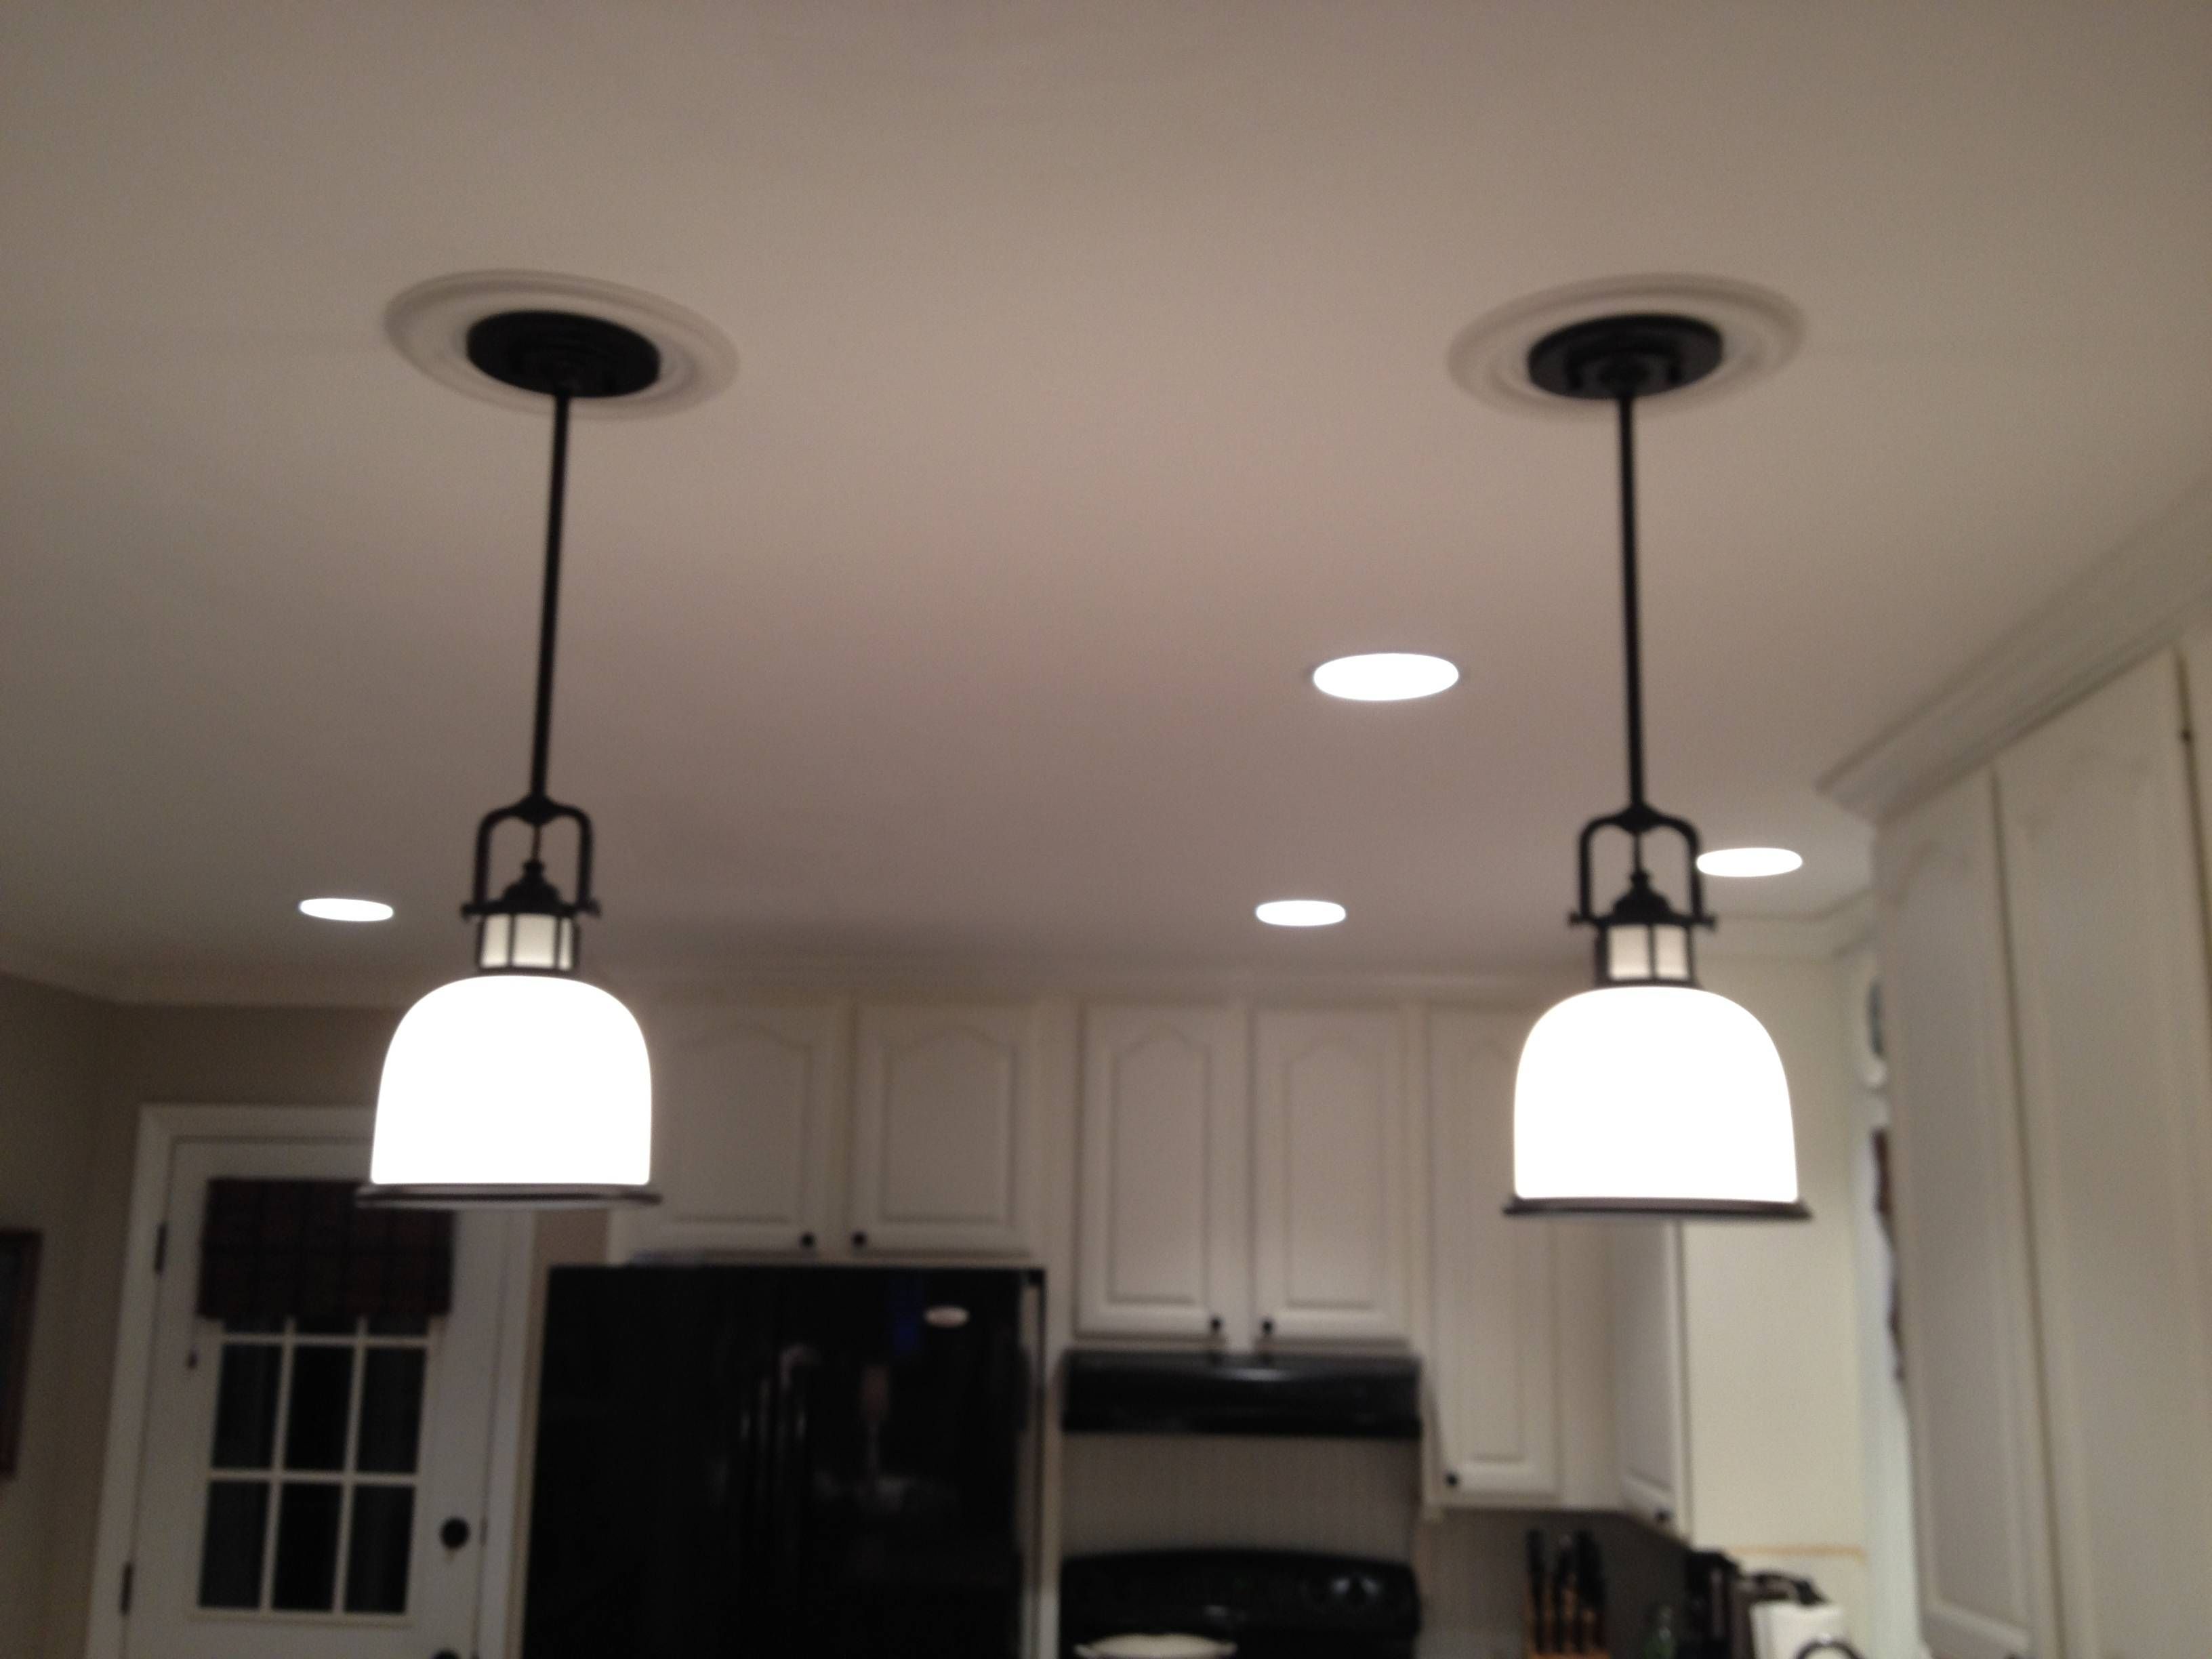 New Recessed Light To Pendant 13 On Kitchen Island Pendant Regarding Recessed Light To Pendant Lights (View 2 of 15)